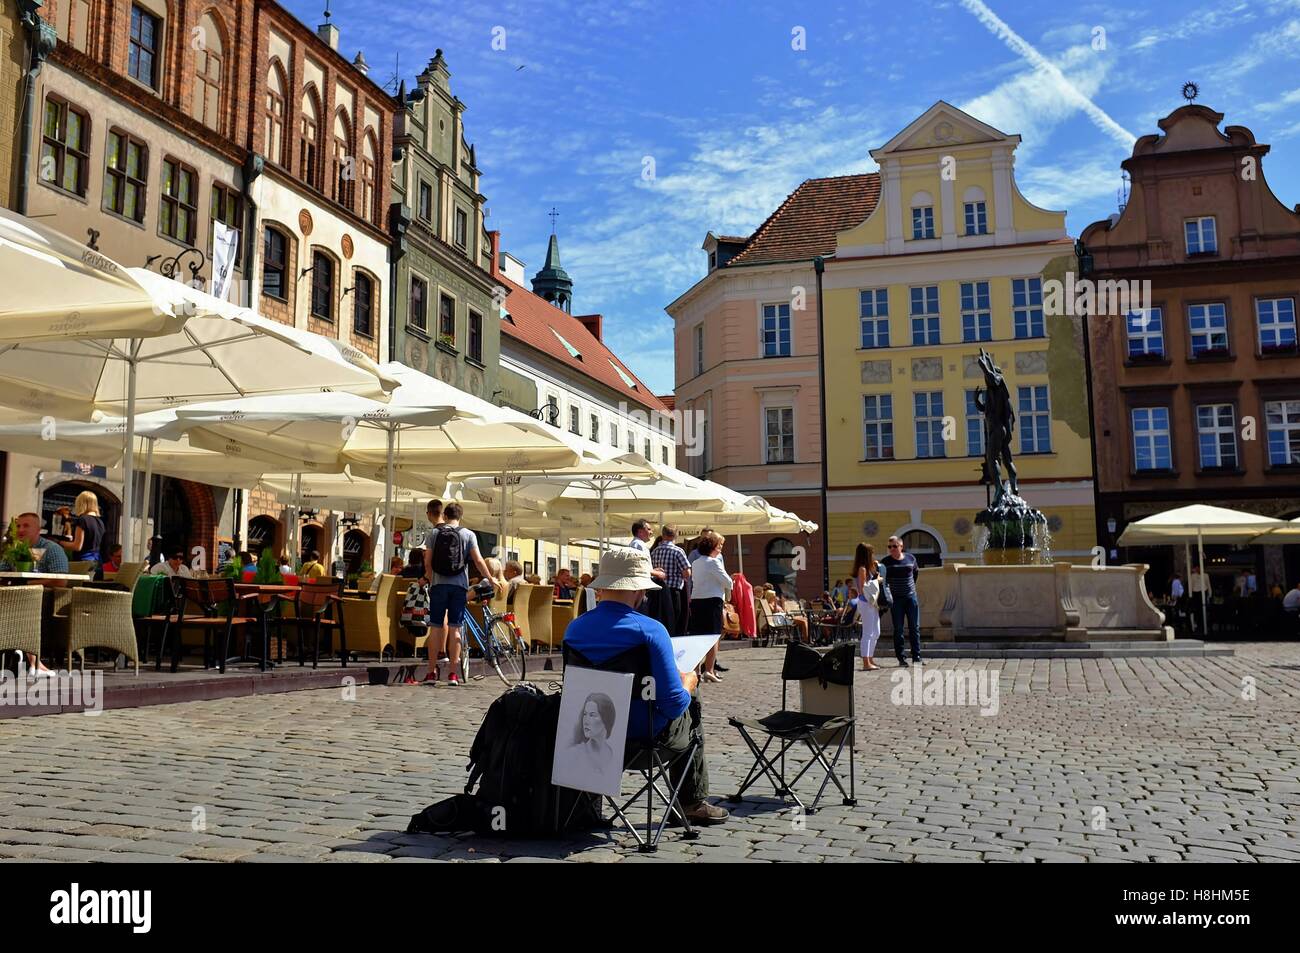 Preserved old town square in Poznan, Poland on a sunny summer day. Stock Photo